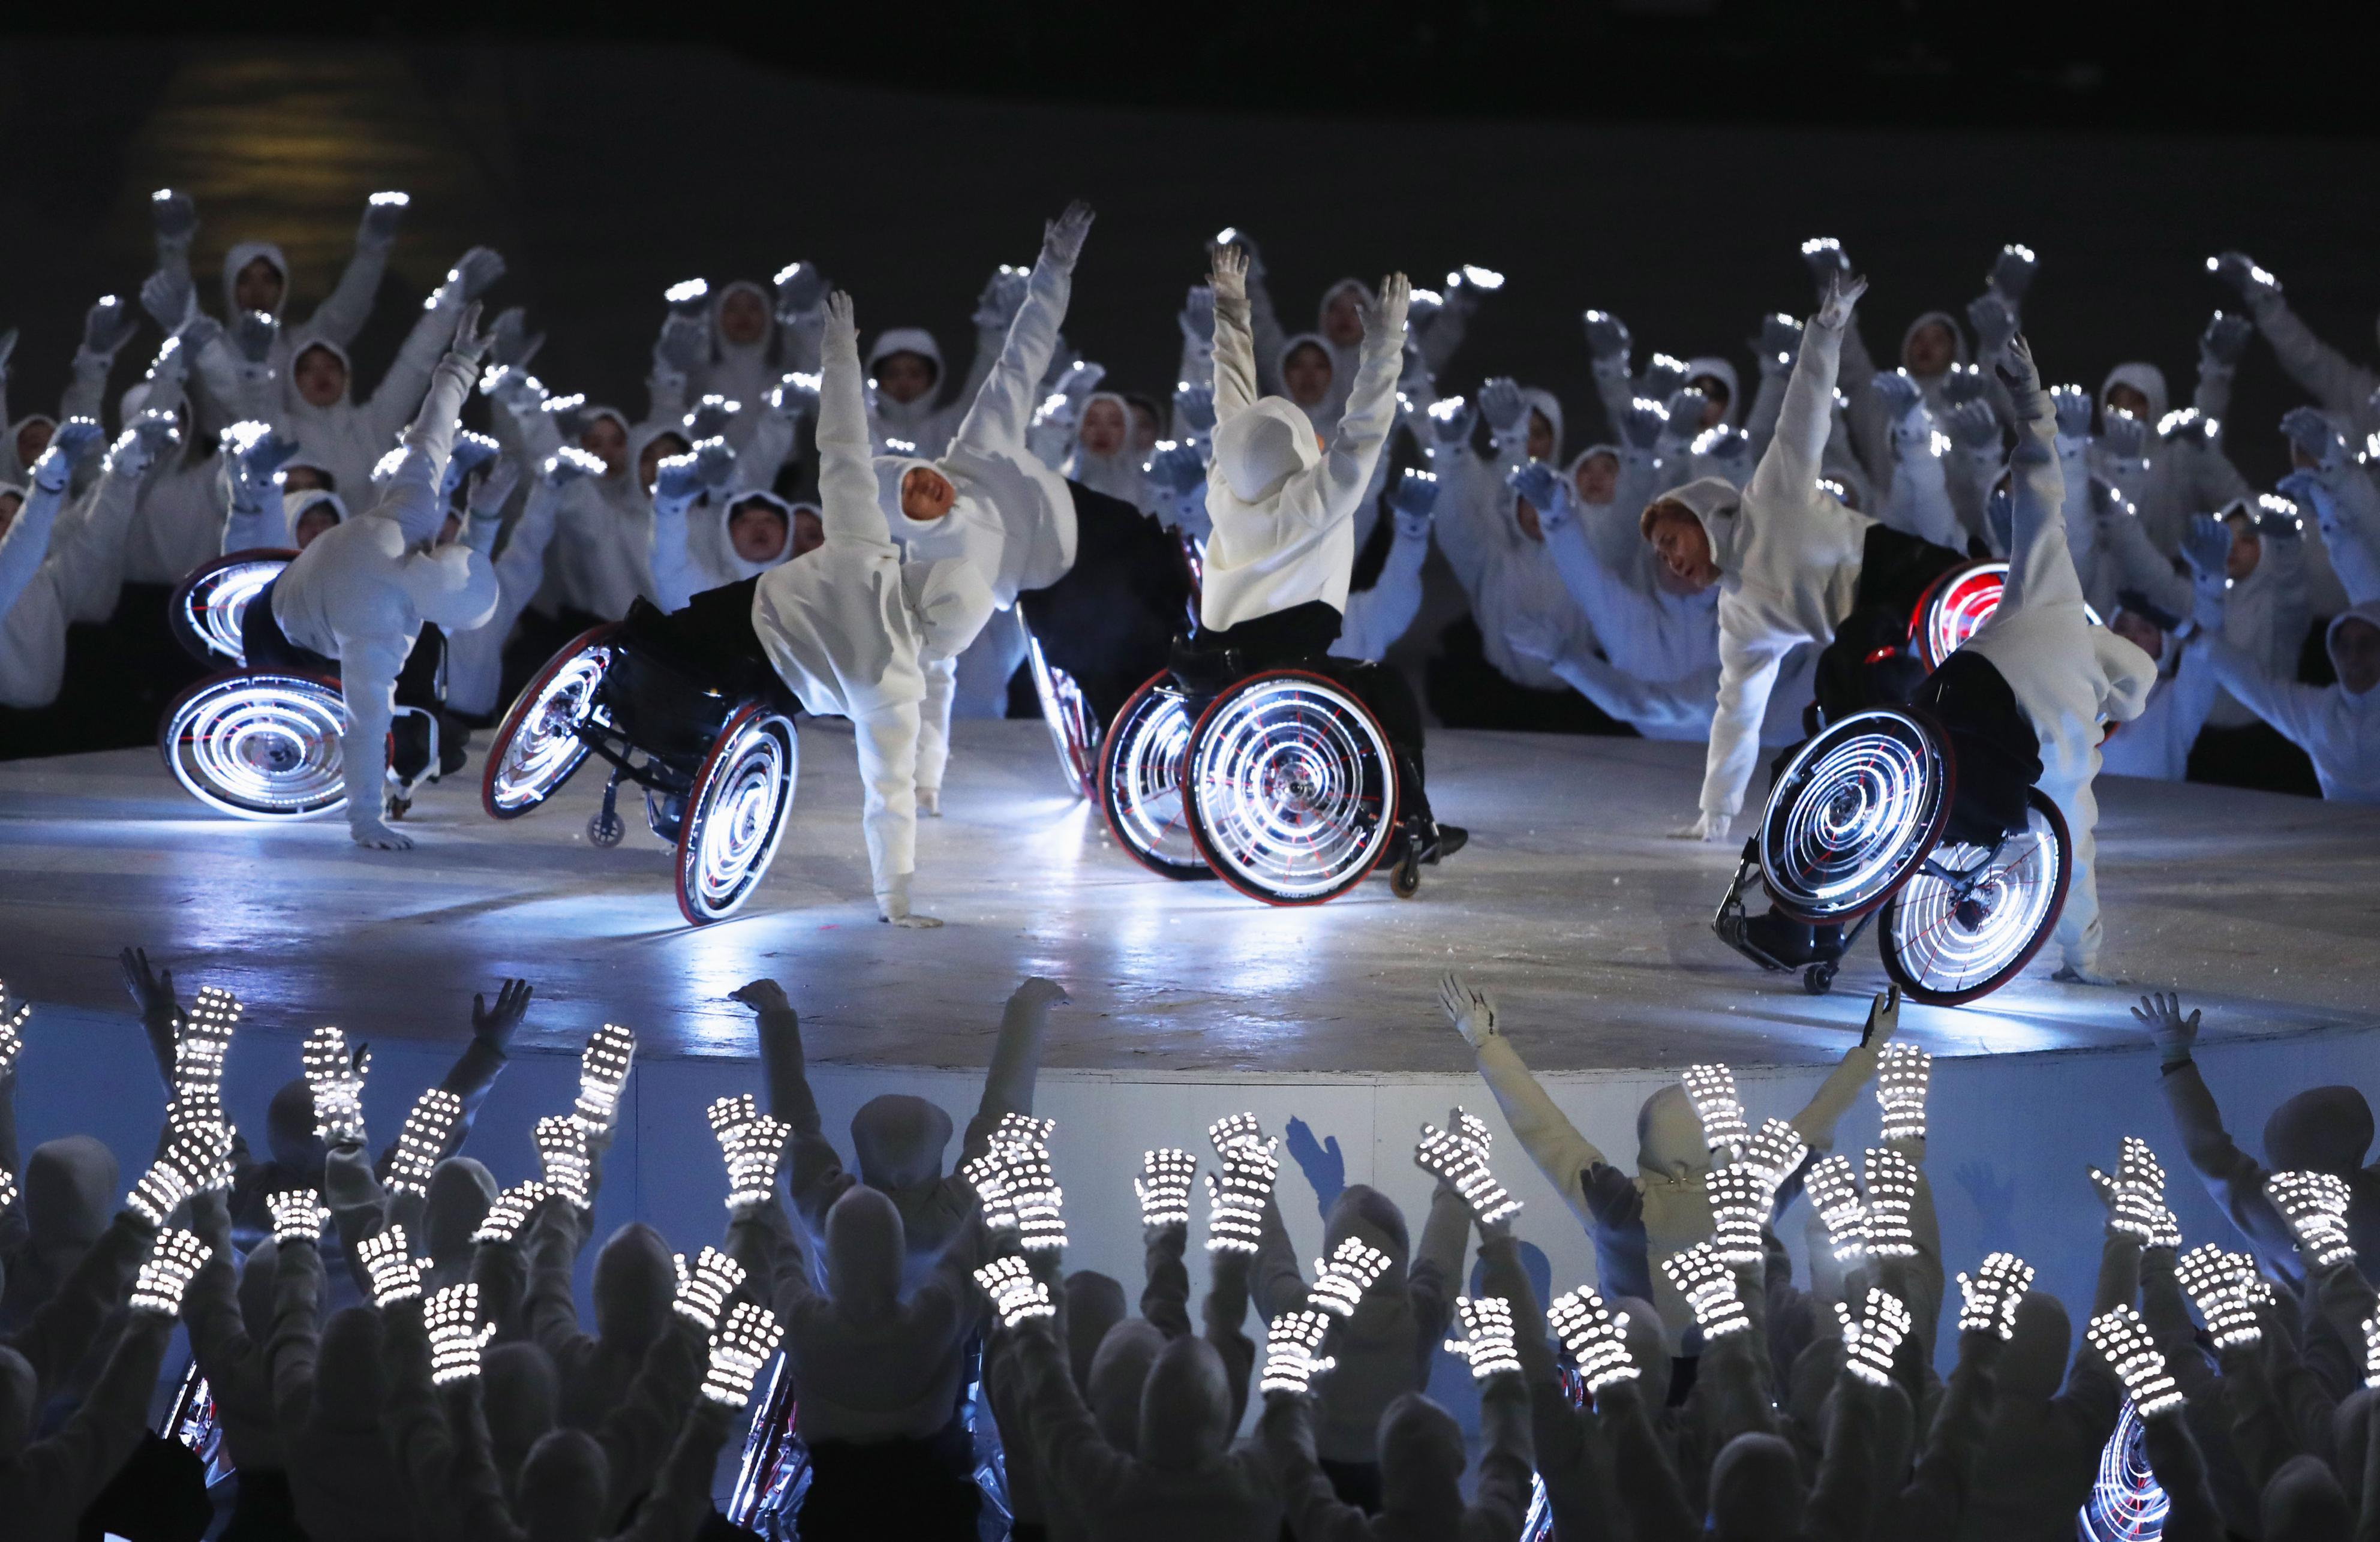 Performers take part in the opening ceremony of the Pyeongchang Winter Paralympics at the Pyeongchang Olympic Stadium in South Korea on March 9, 2018. (Kyodo)
==Kyodo